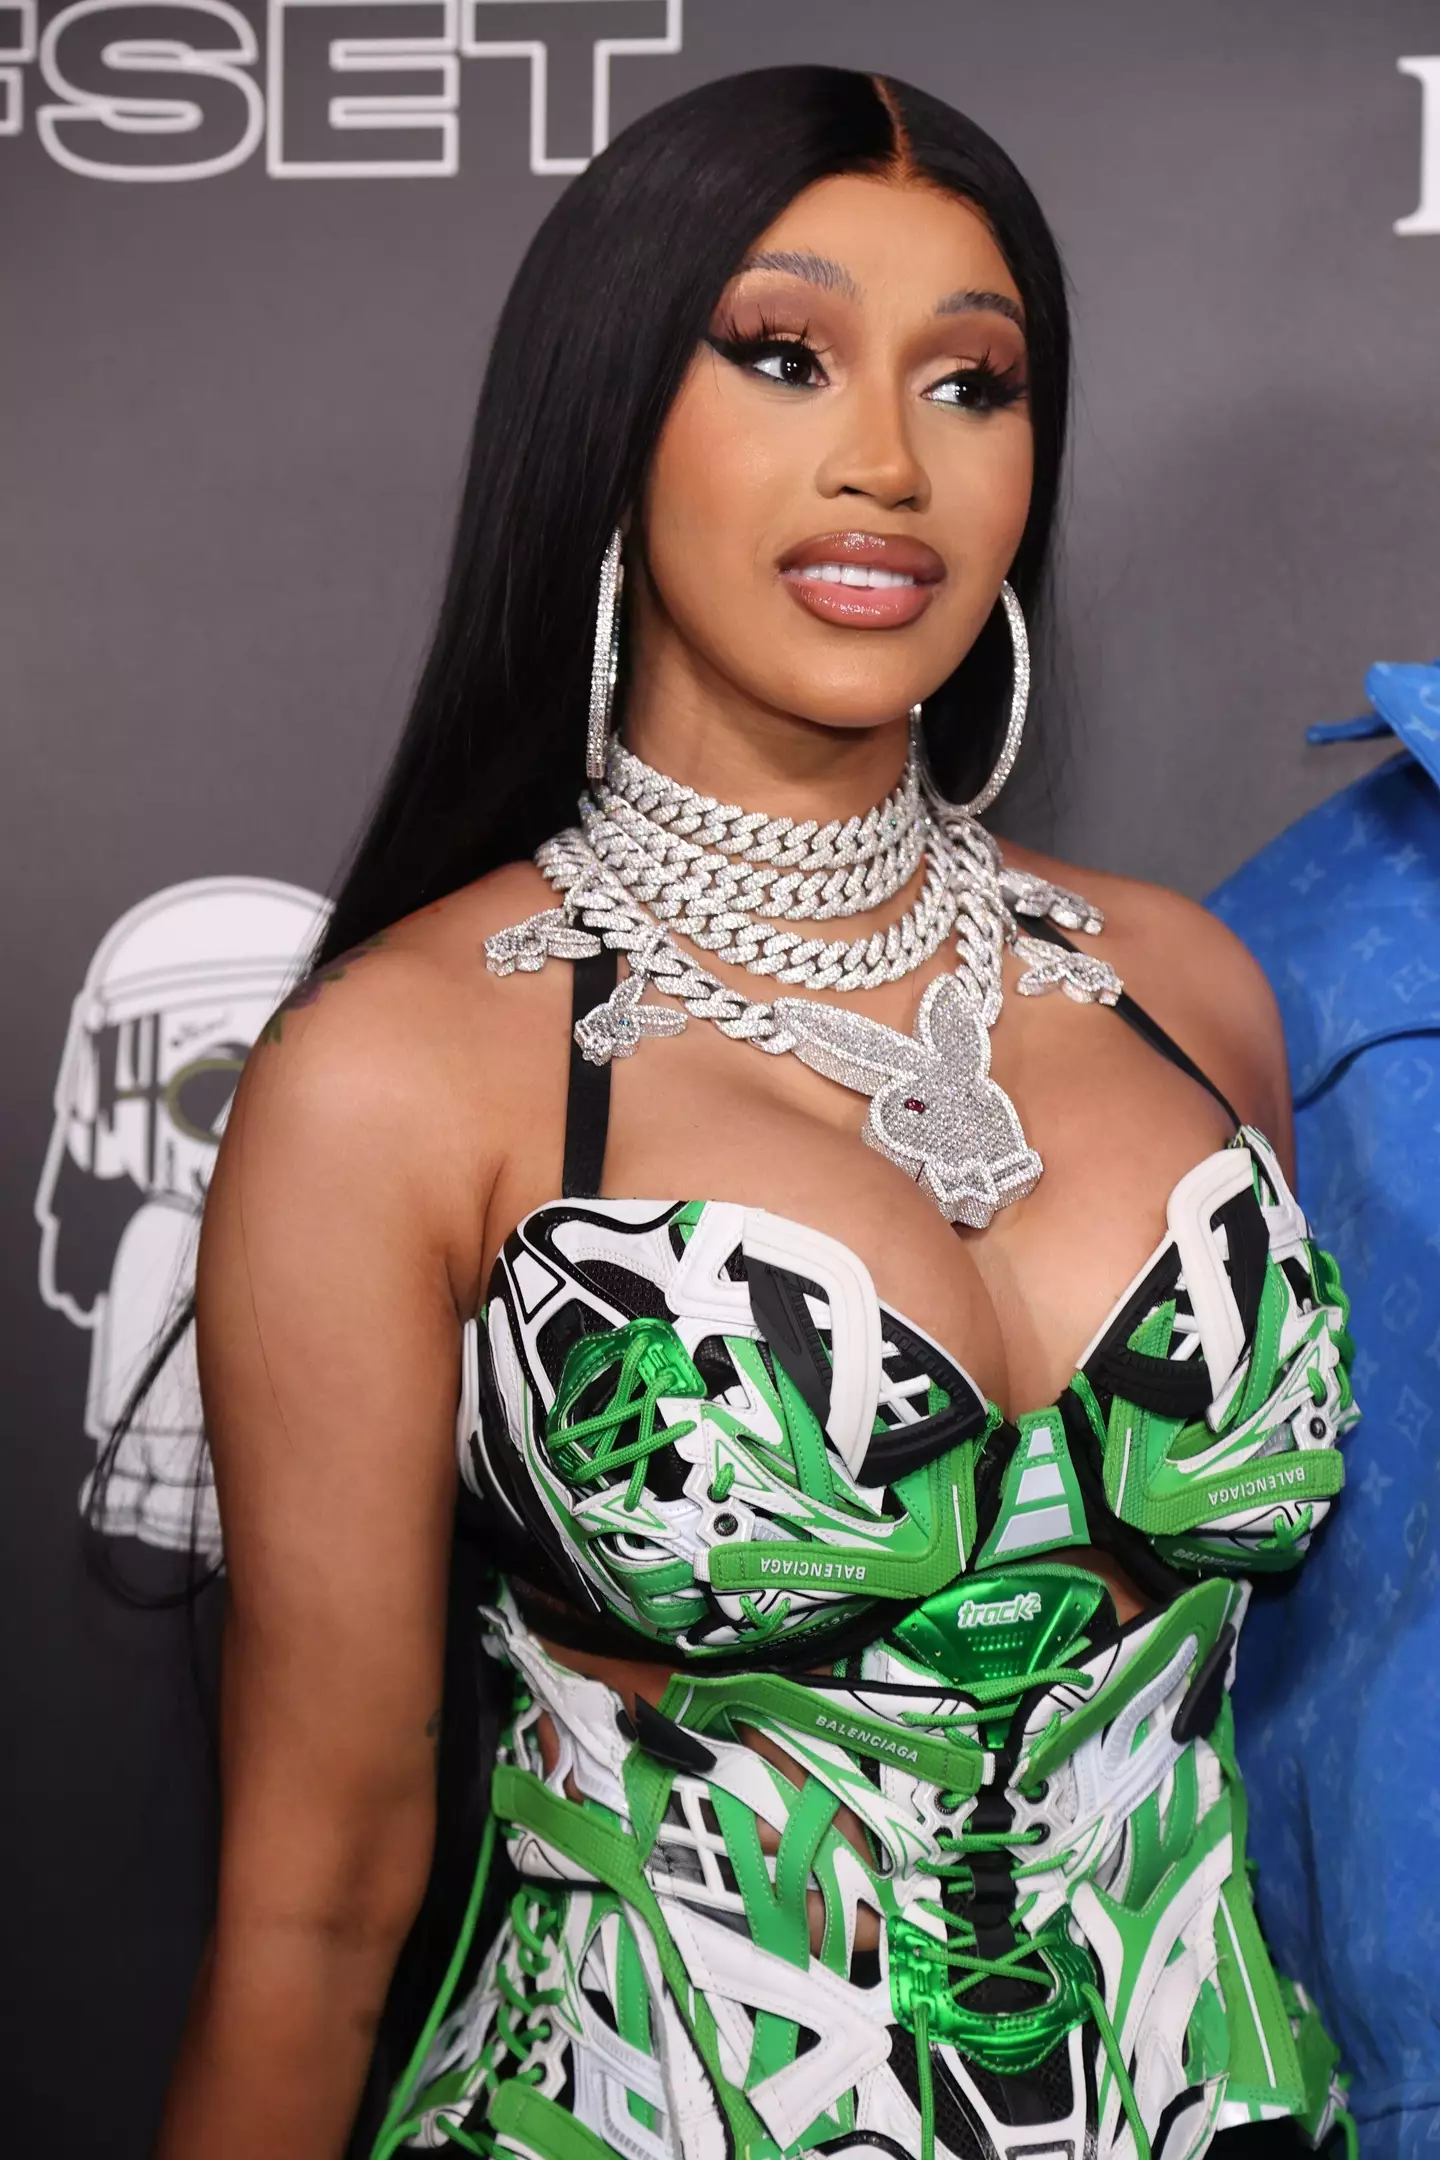 Cardi B is currently in a legal battle with a blogger.